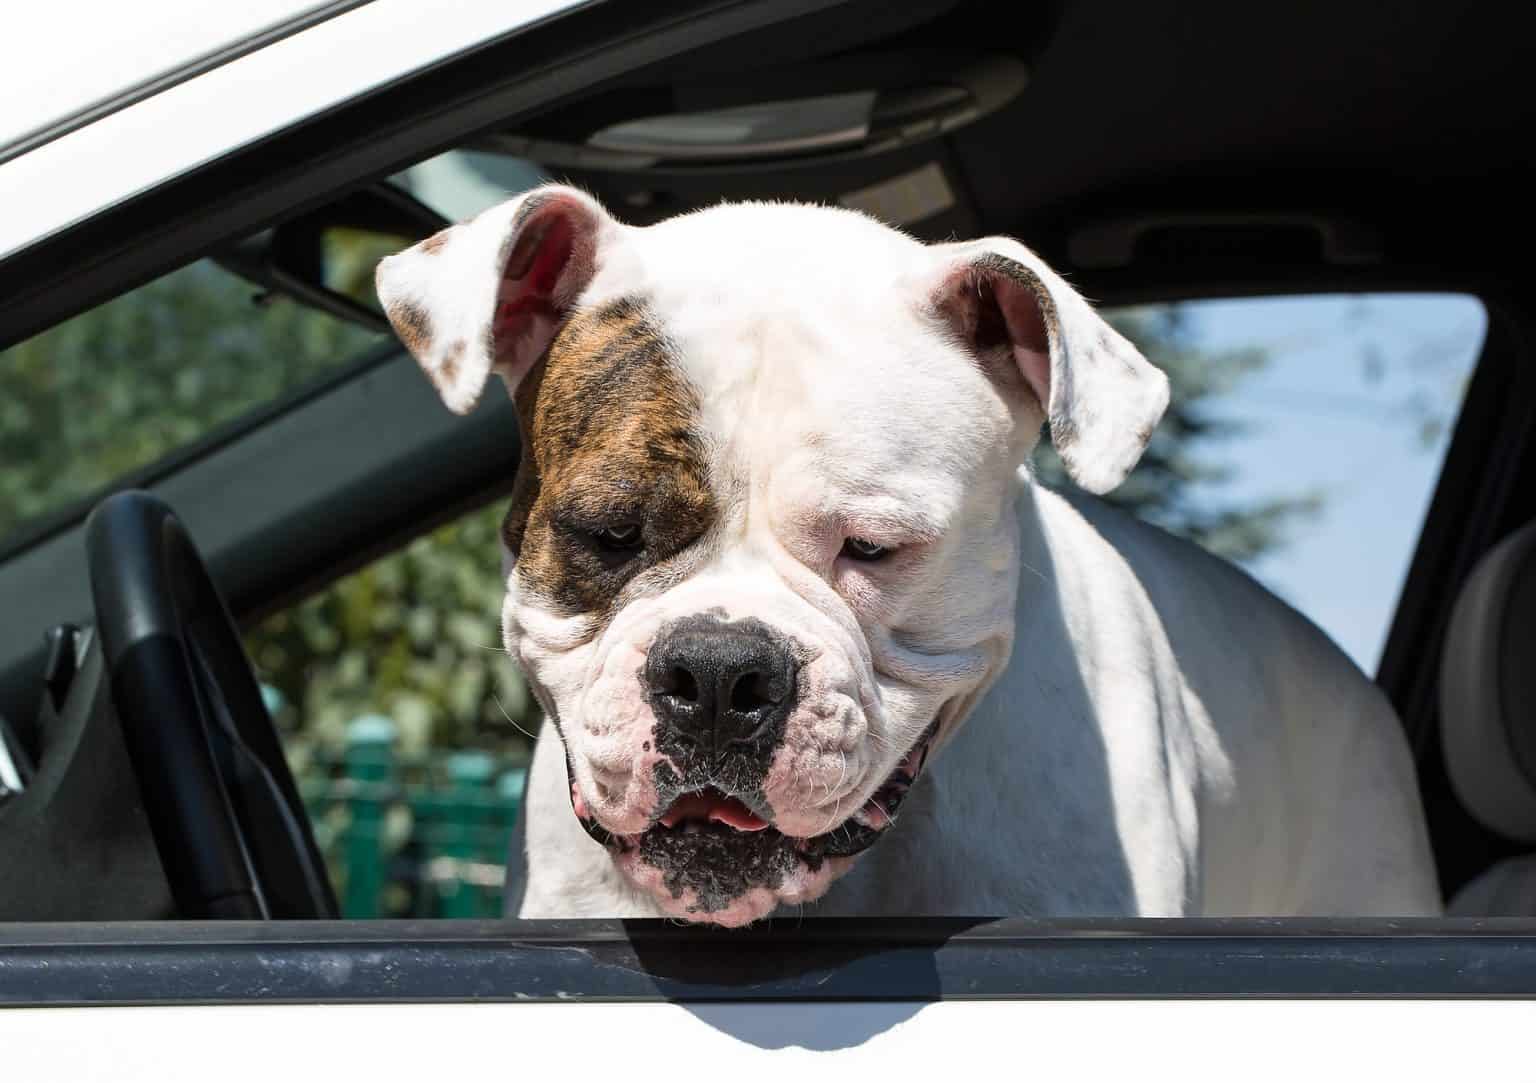 Bullypit: Is the American Bulldog Pitbull mix your kind of dog? - K9 Web
